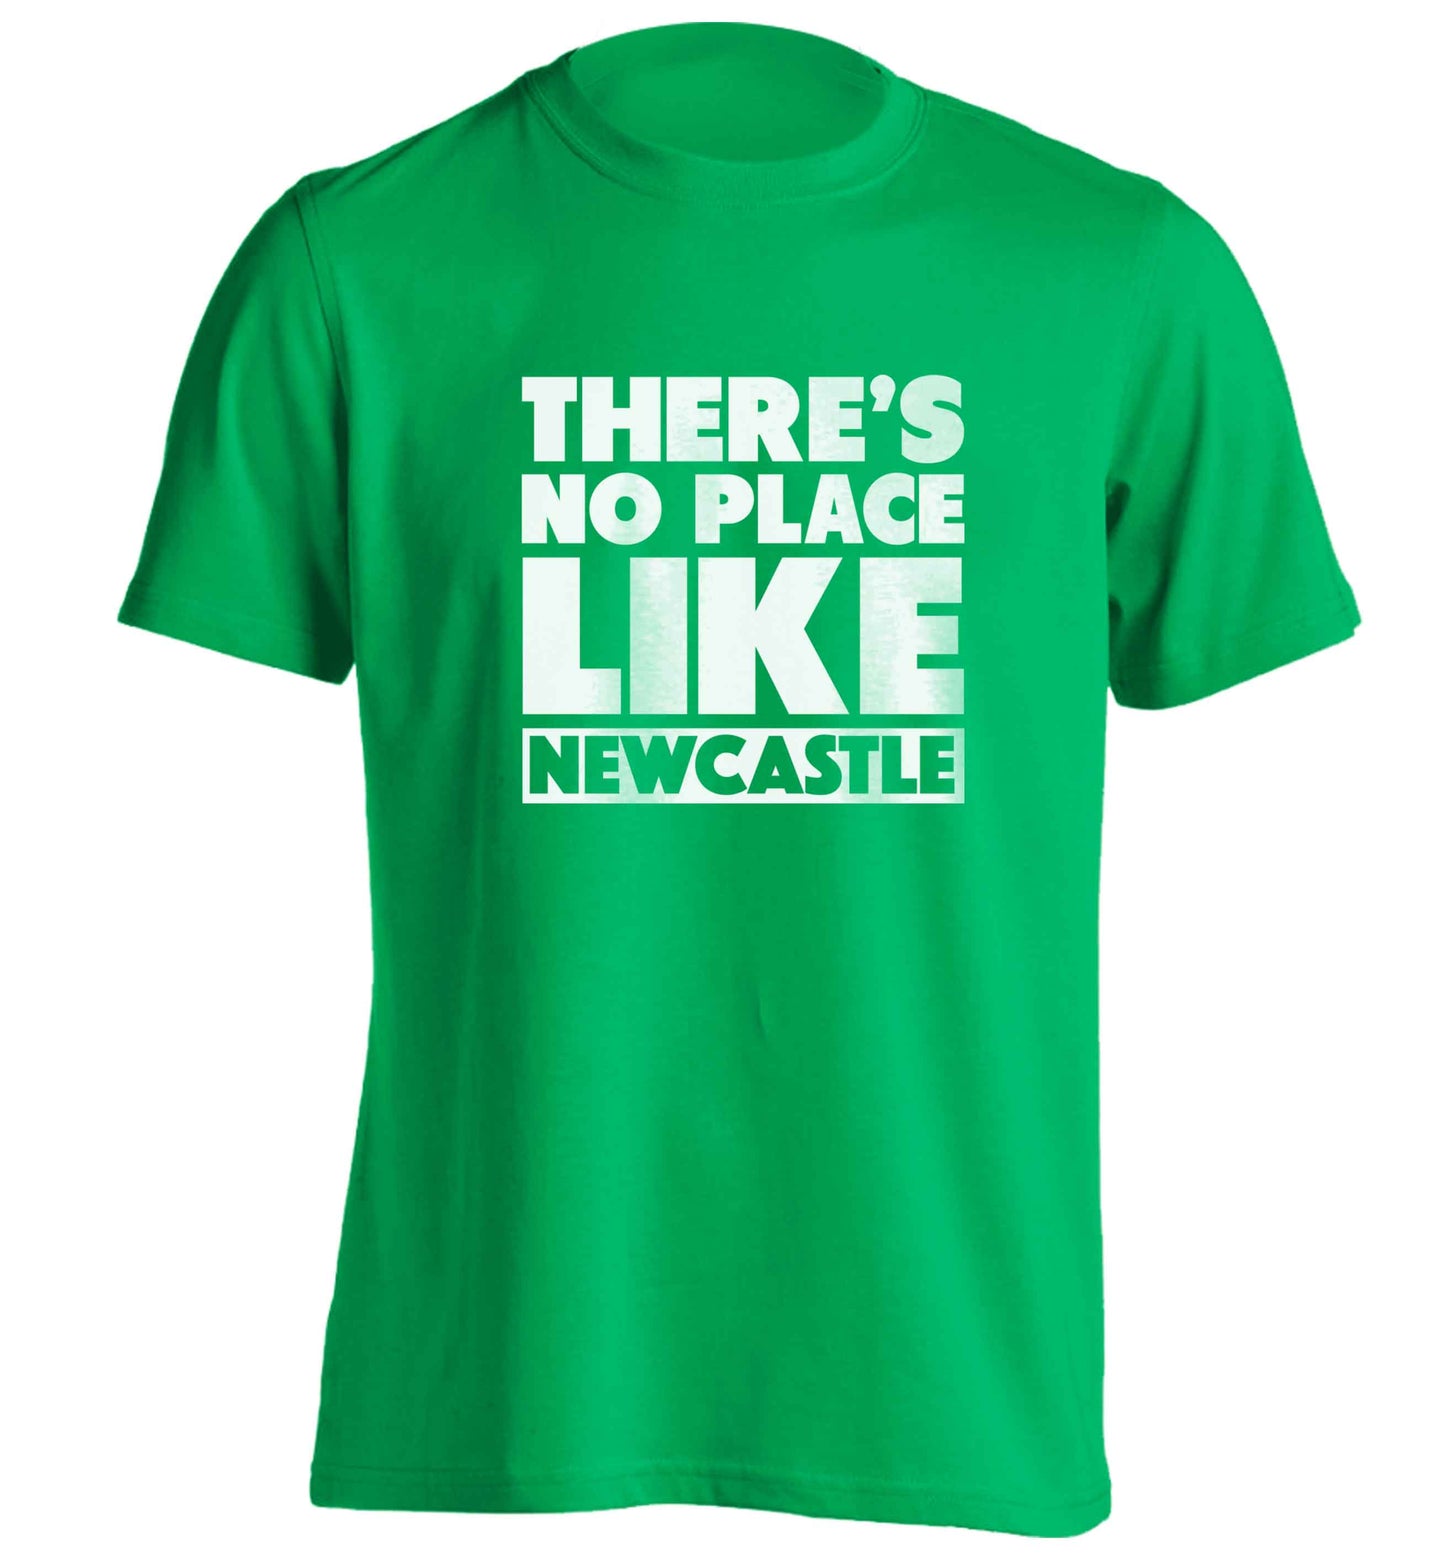 There's no place like Newcastle adults unisex green Tshirt 2XL